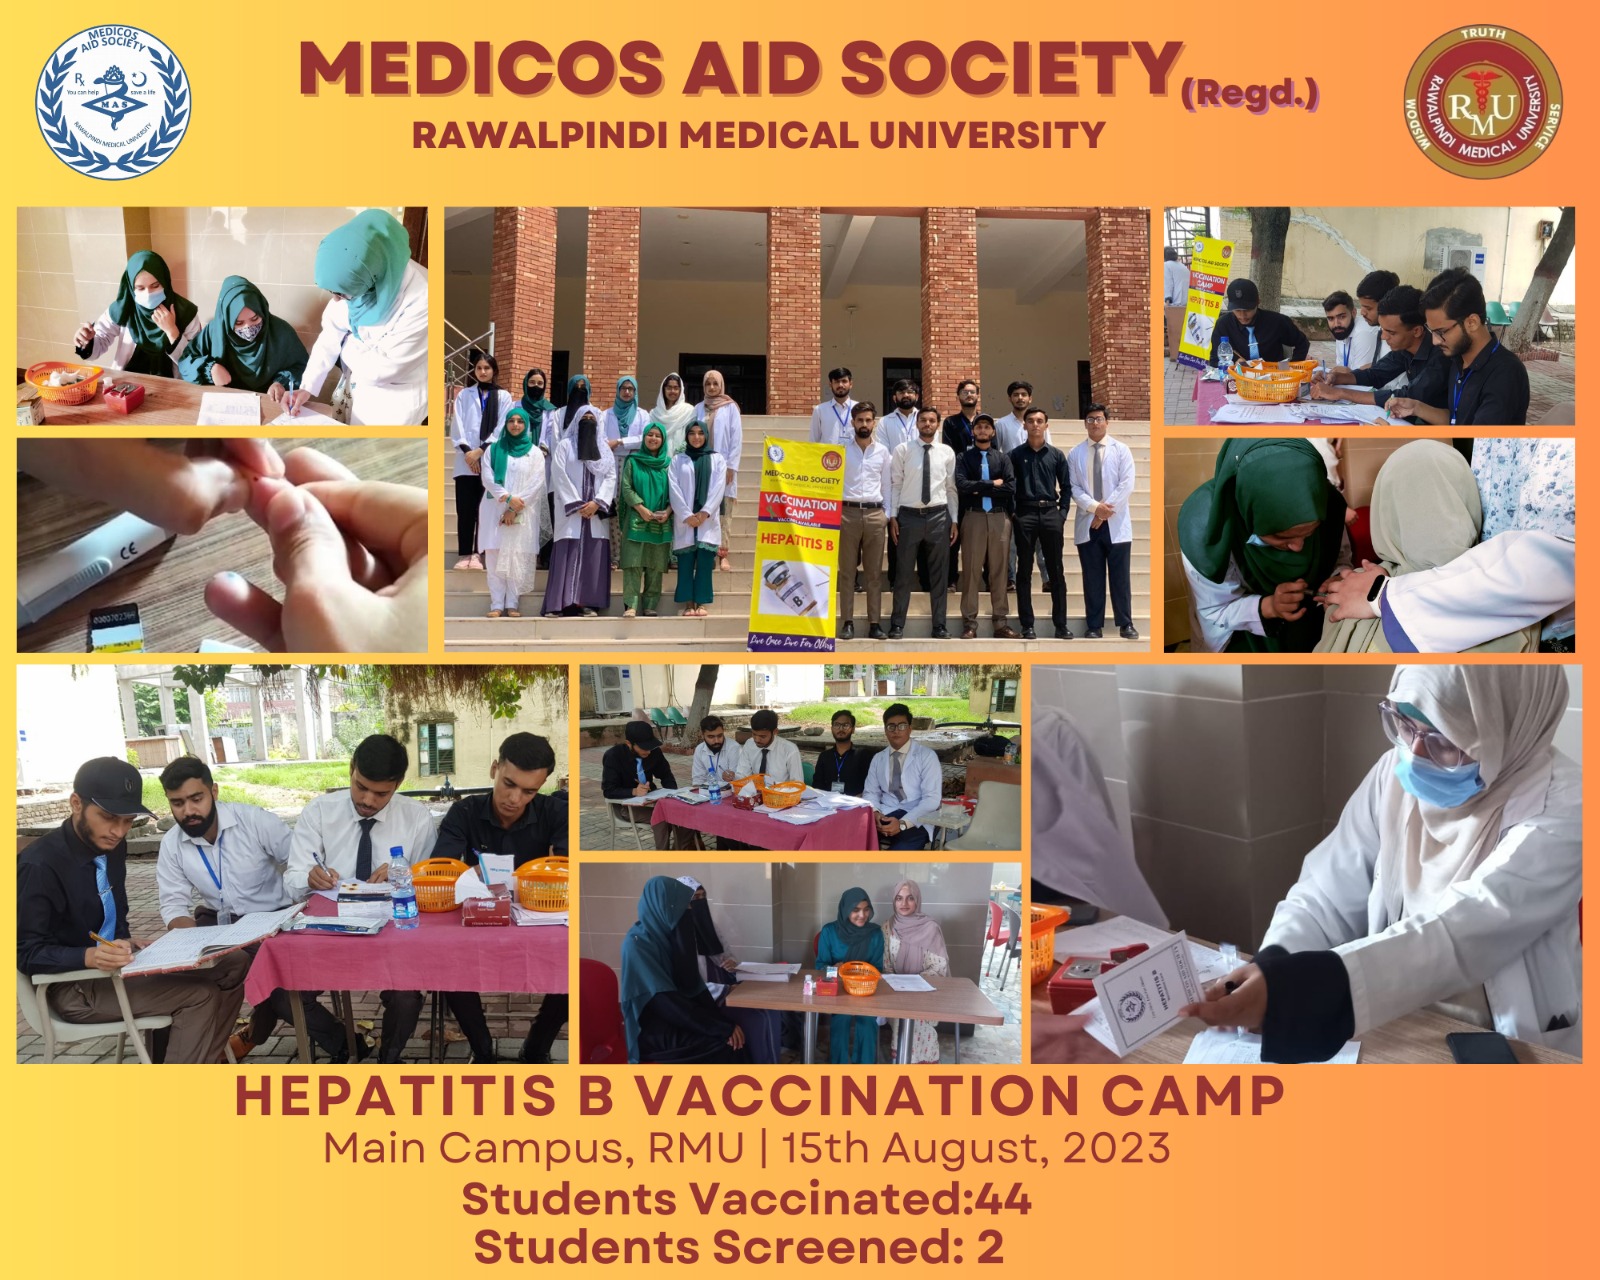 Vaccination & screening camp against Hepatitis B on  Tuesday, 15th August, 2023  at Main Campus, RMU  Vaccinated: 44  Screened: 2